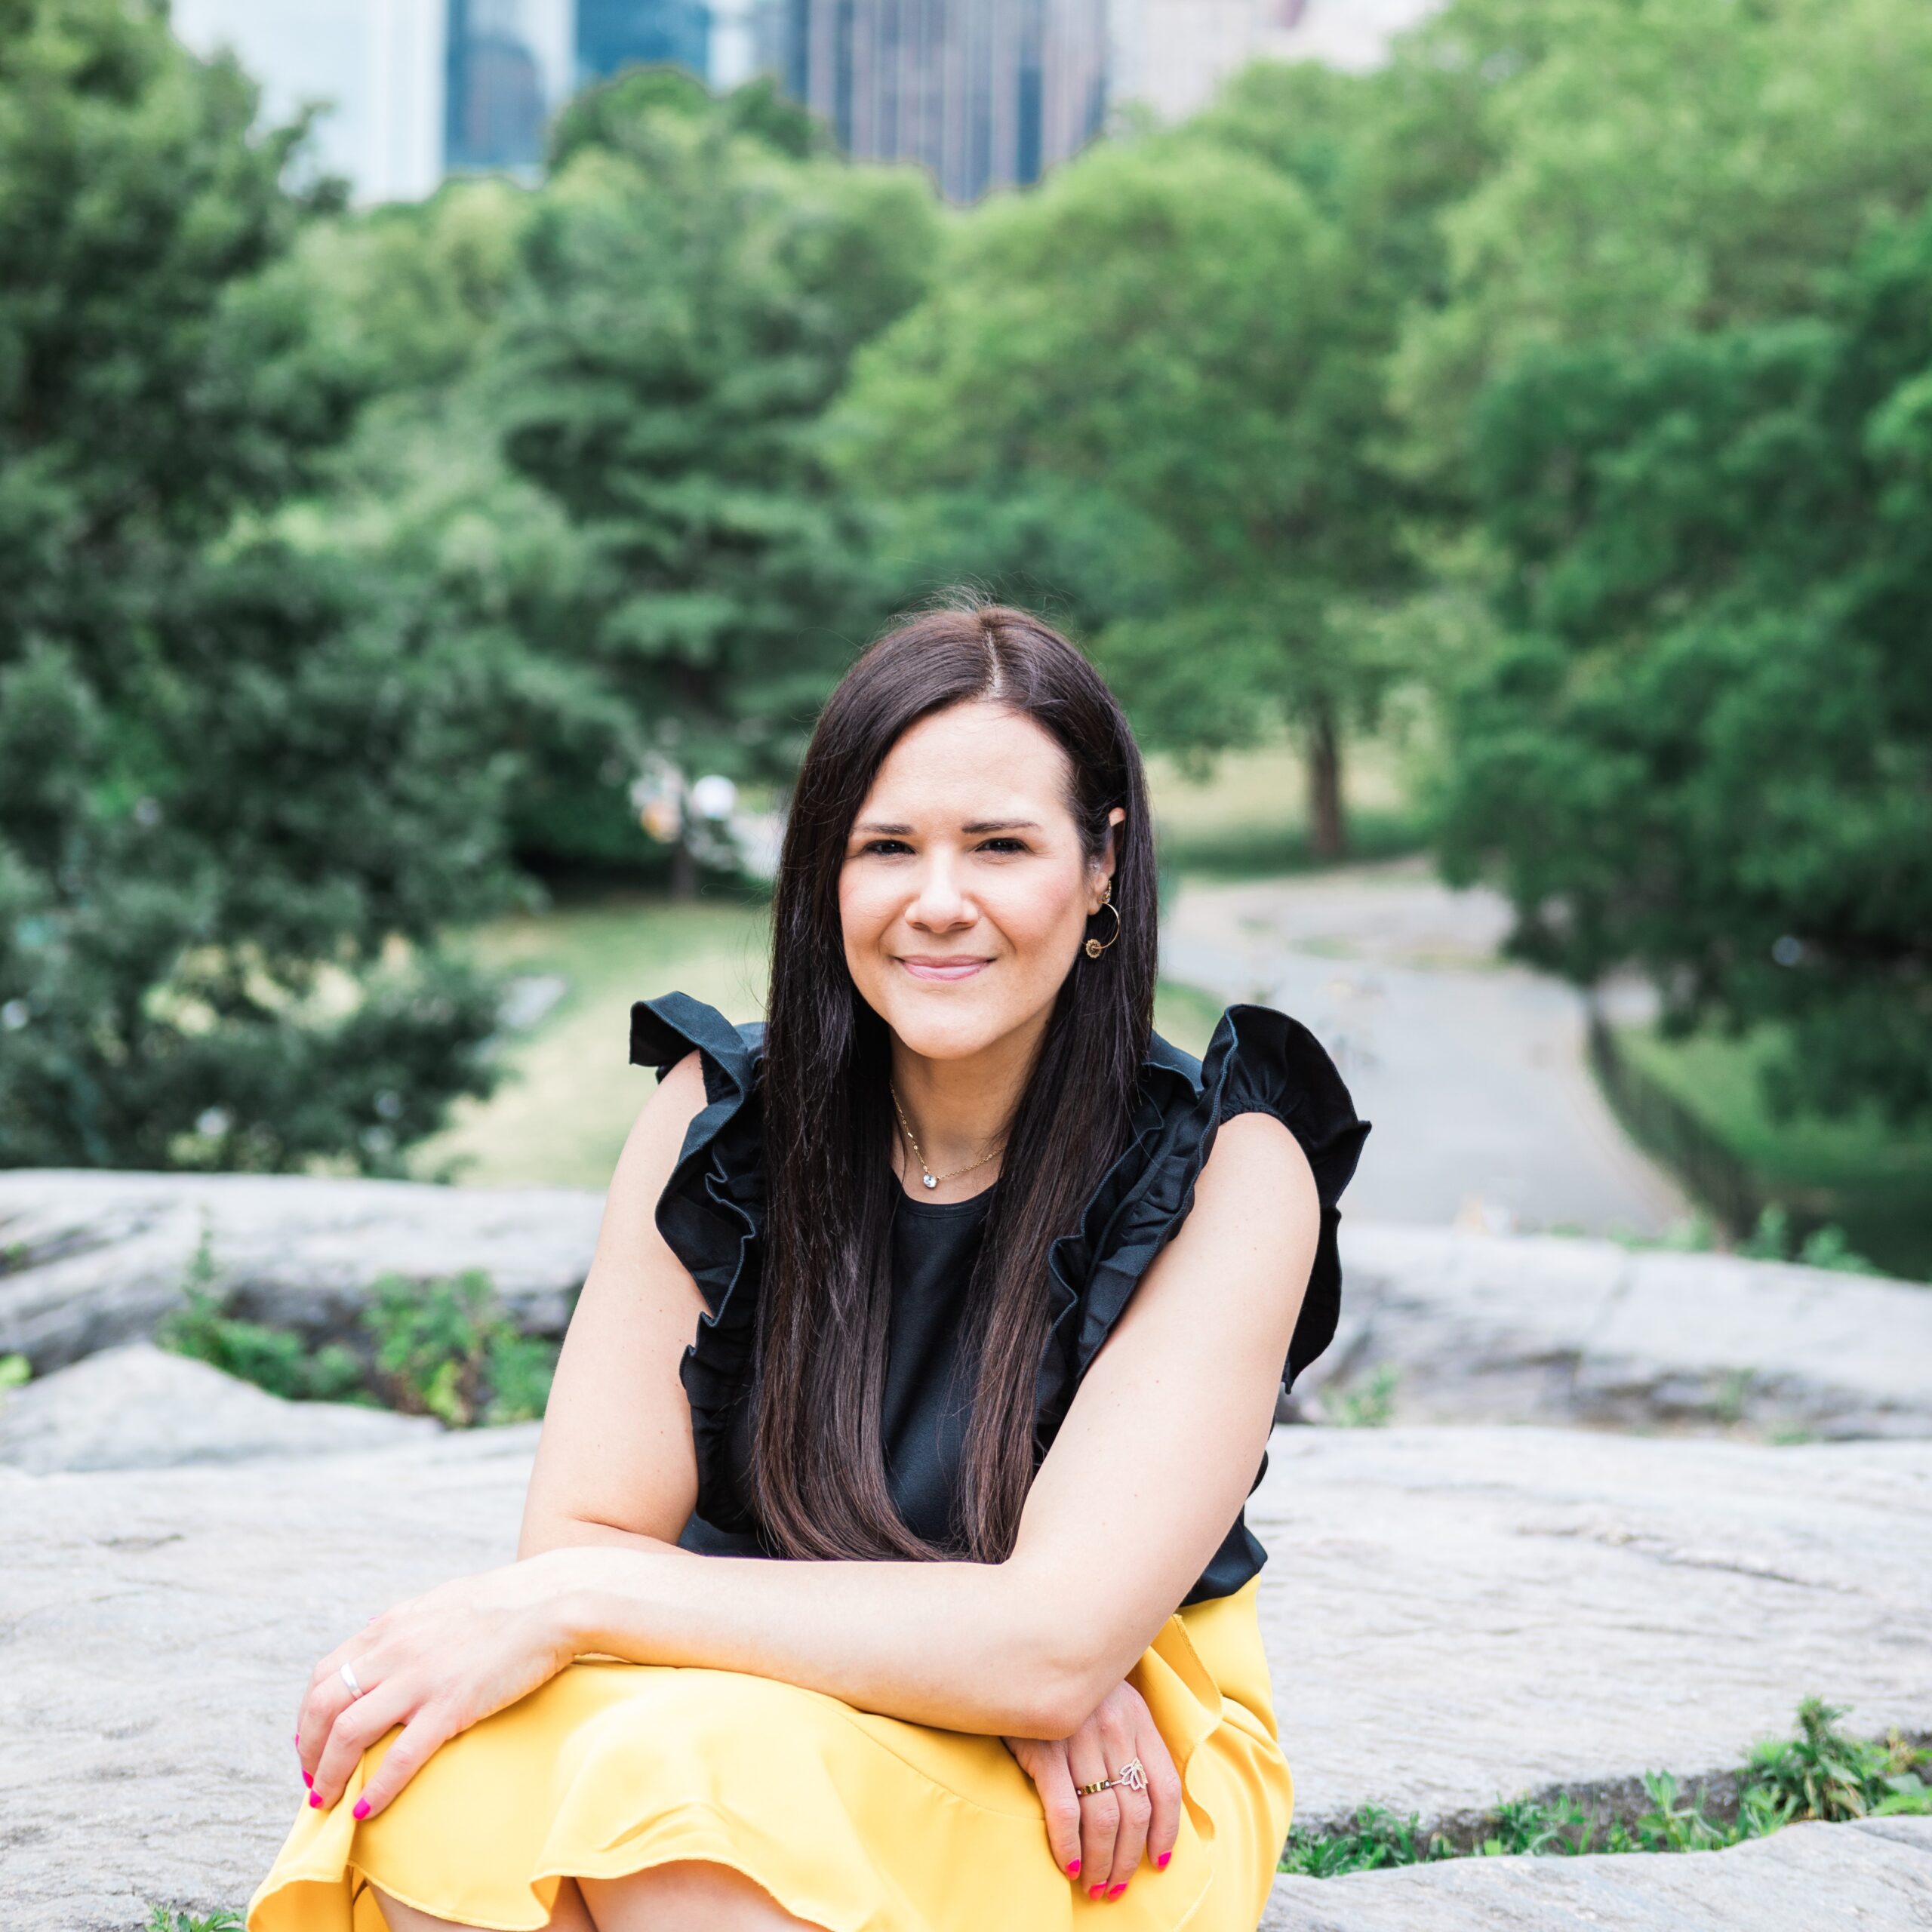 New York Brand Shoot with Business Strategist Natalie Potts. Taken by London brand photographer AKP branding stories. A white woman sat in Central Park wearing a yellow skirt and black top smiling at the camera